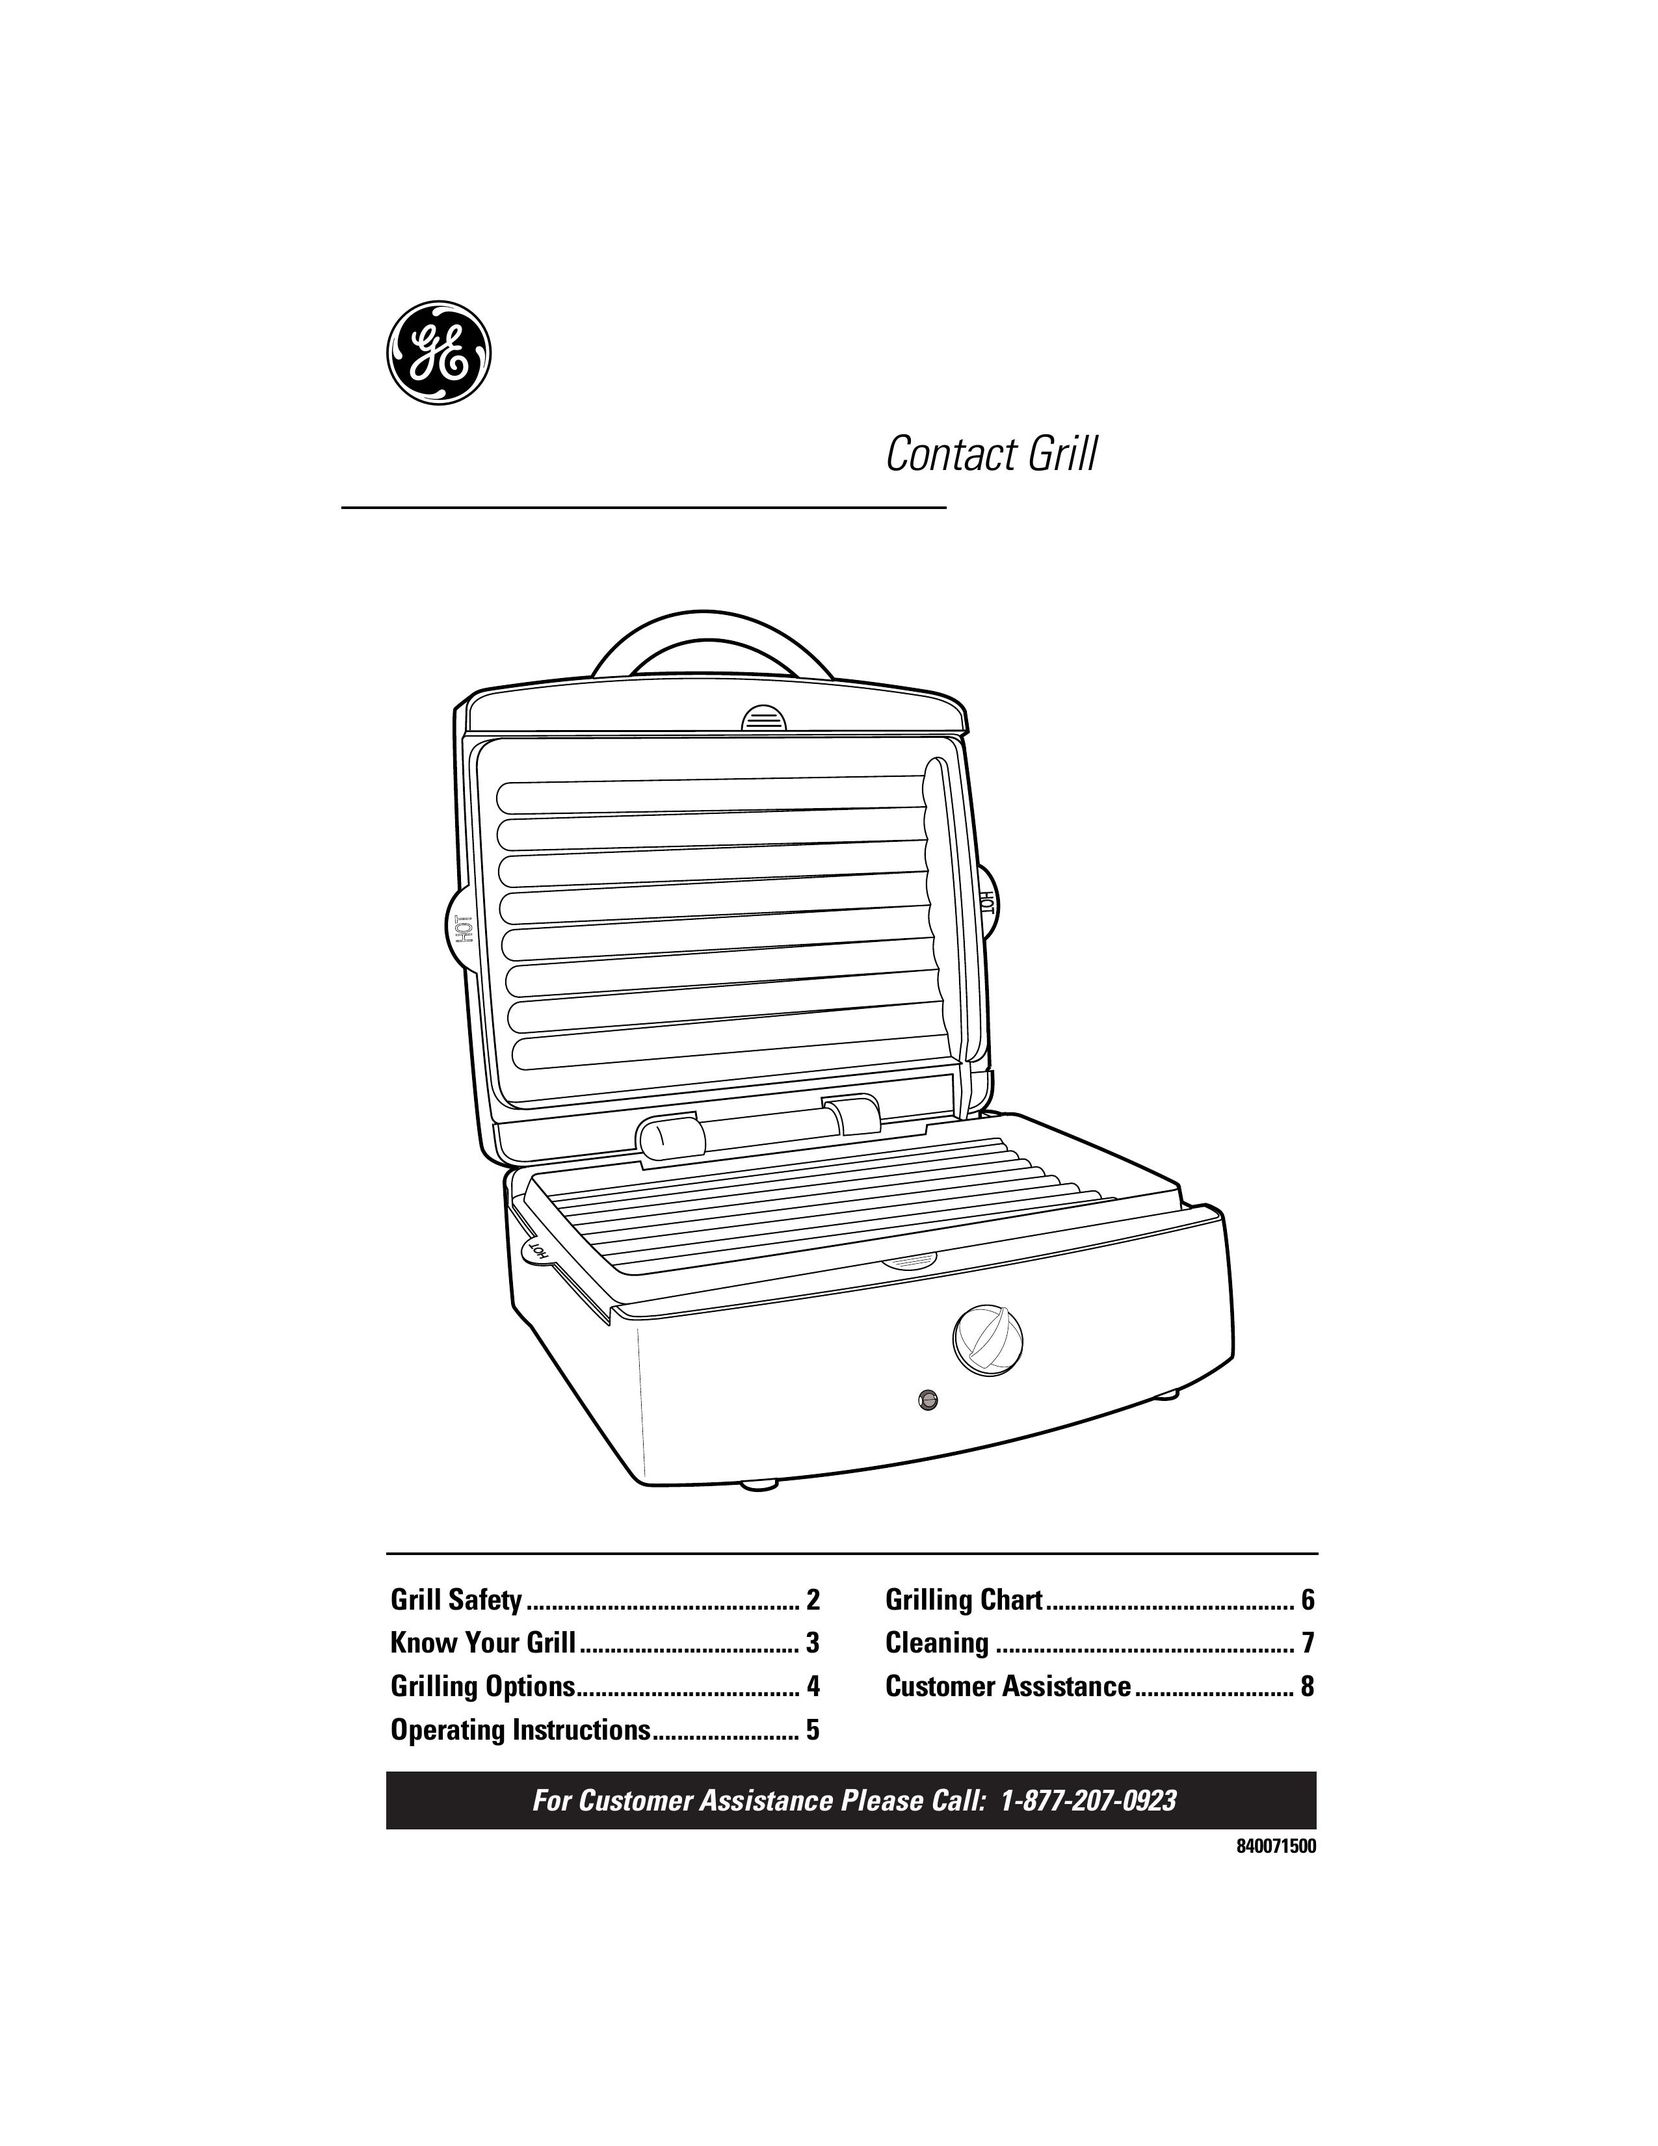 GE 840071500 Kitchen Grill User Manual